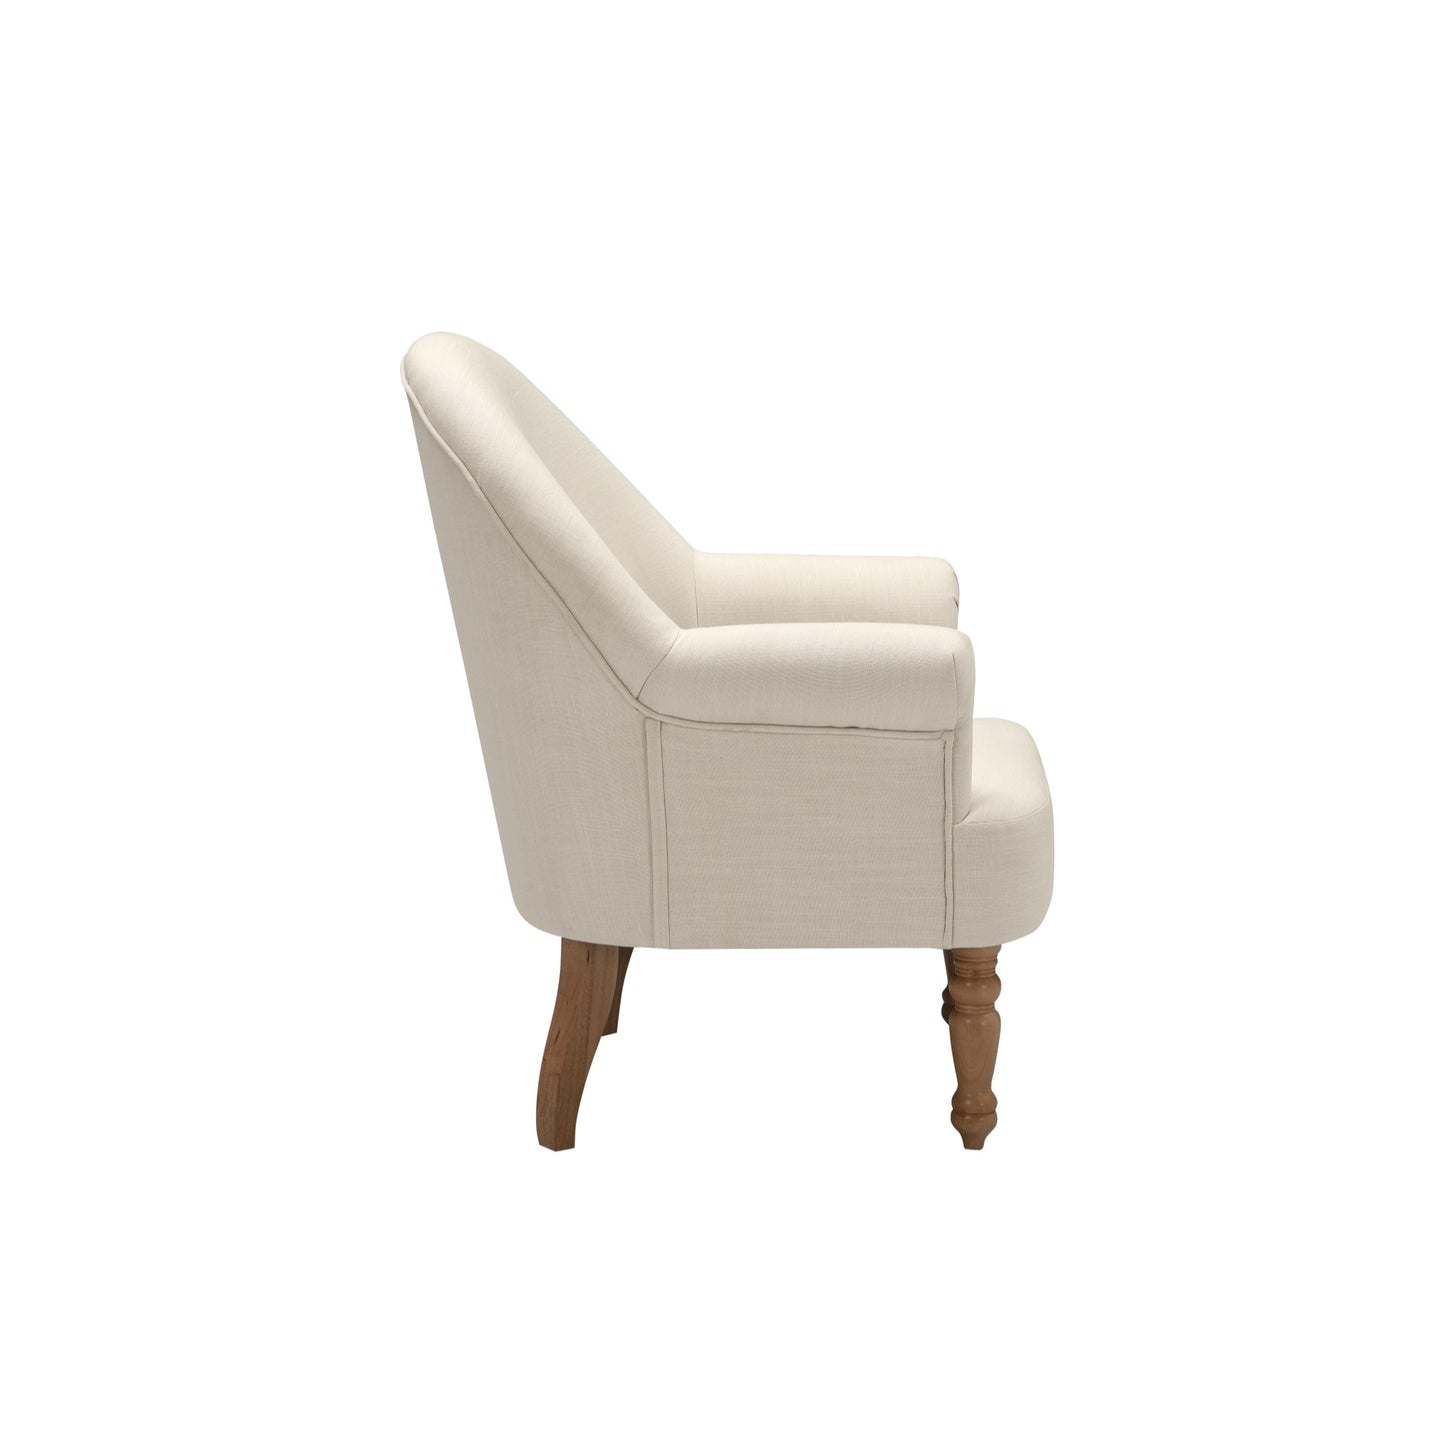 33" Cream And Brown Linen Arm Chair